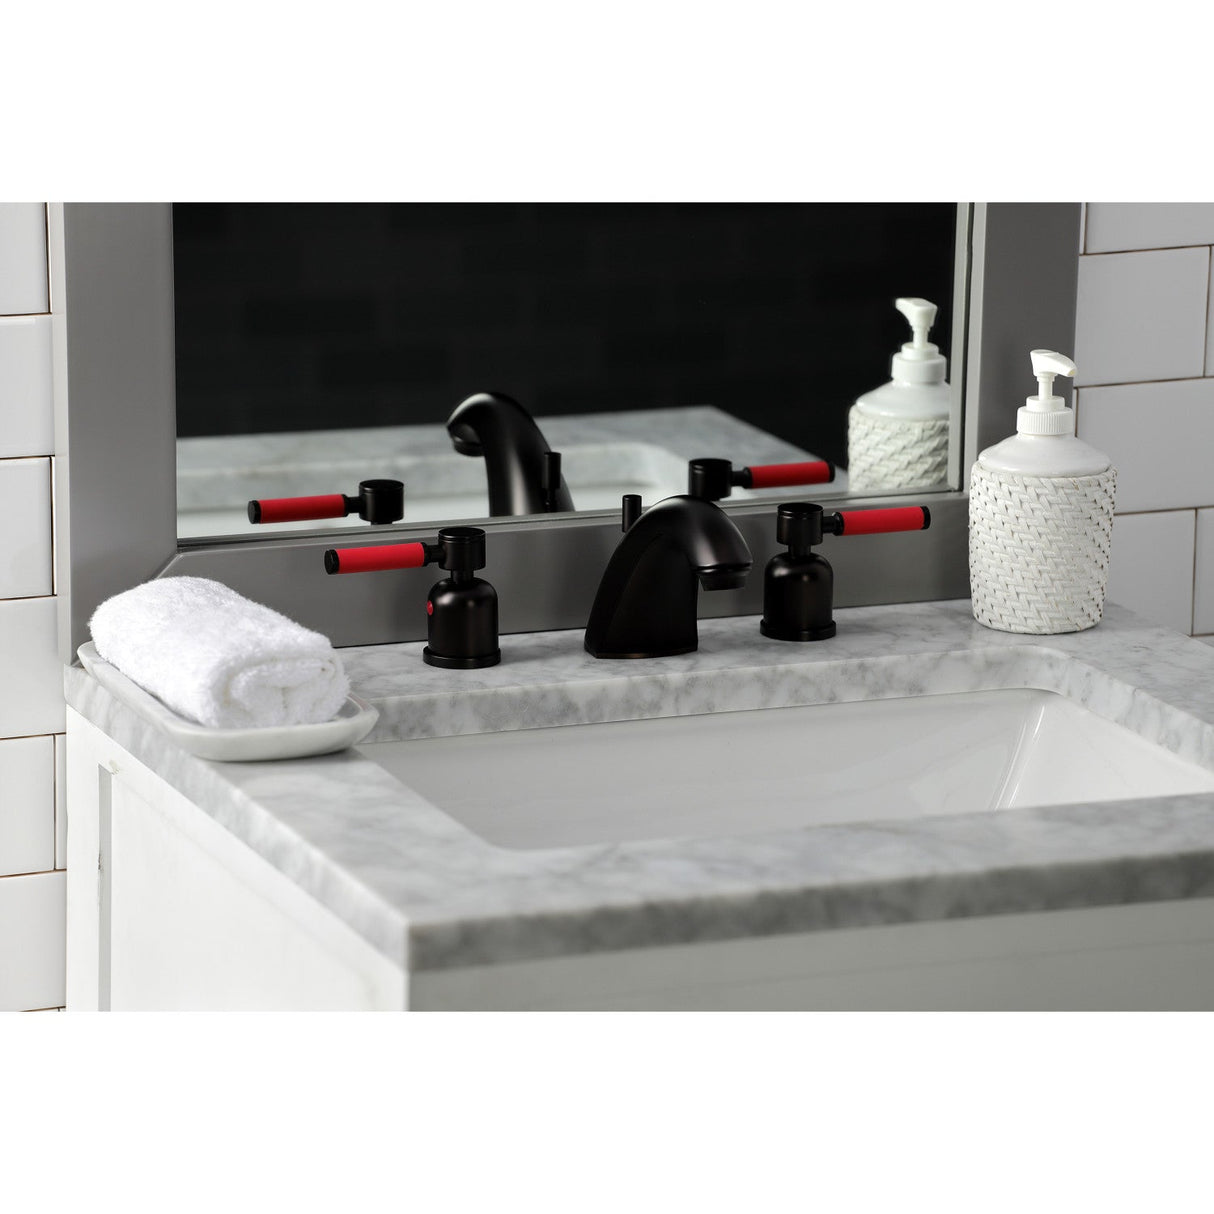 Kaiser FB8955DKL Two-Handle 3-Hole Deck Mount Widespread Bathroom Faucet with Plastic Pop-Up, Oil Rubbed Bronze